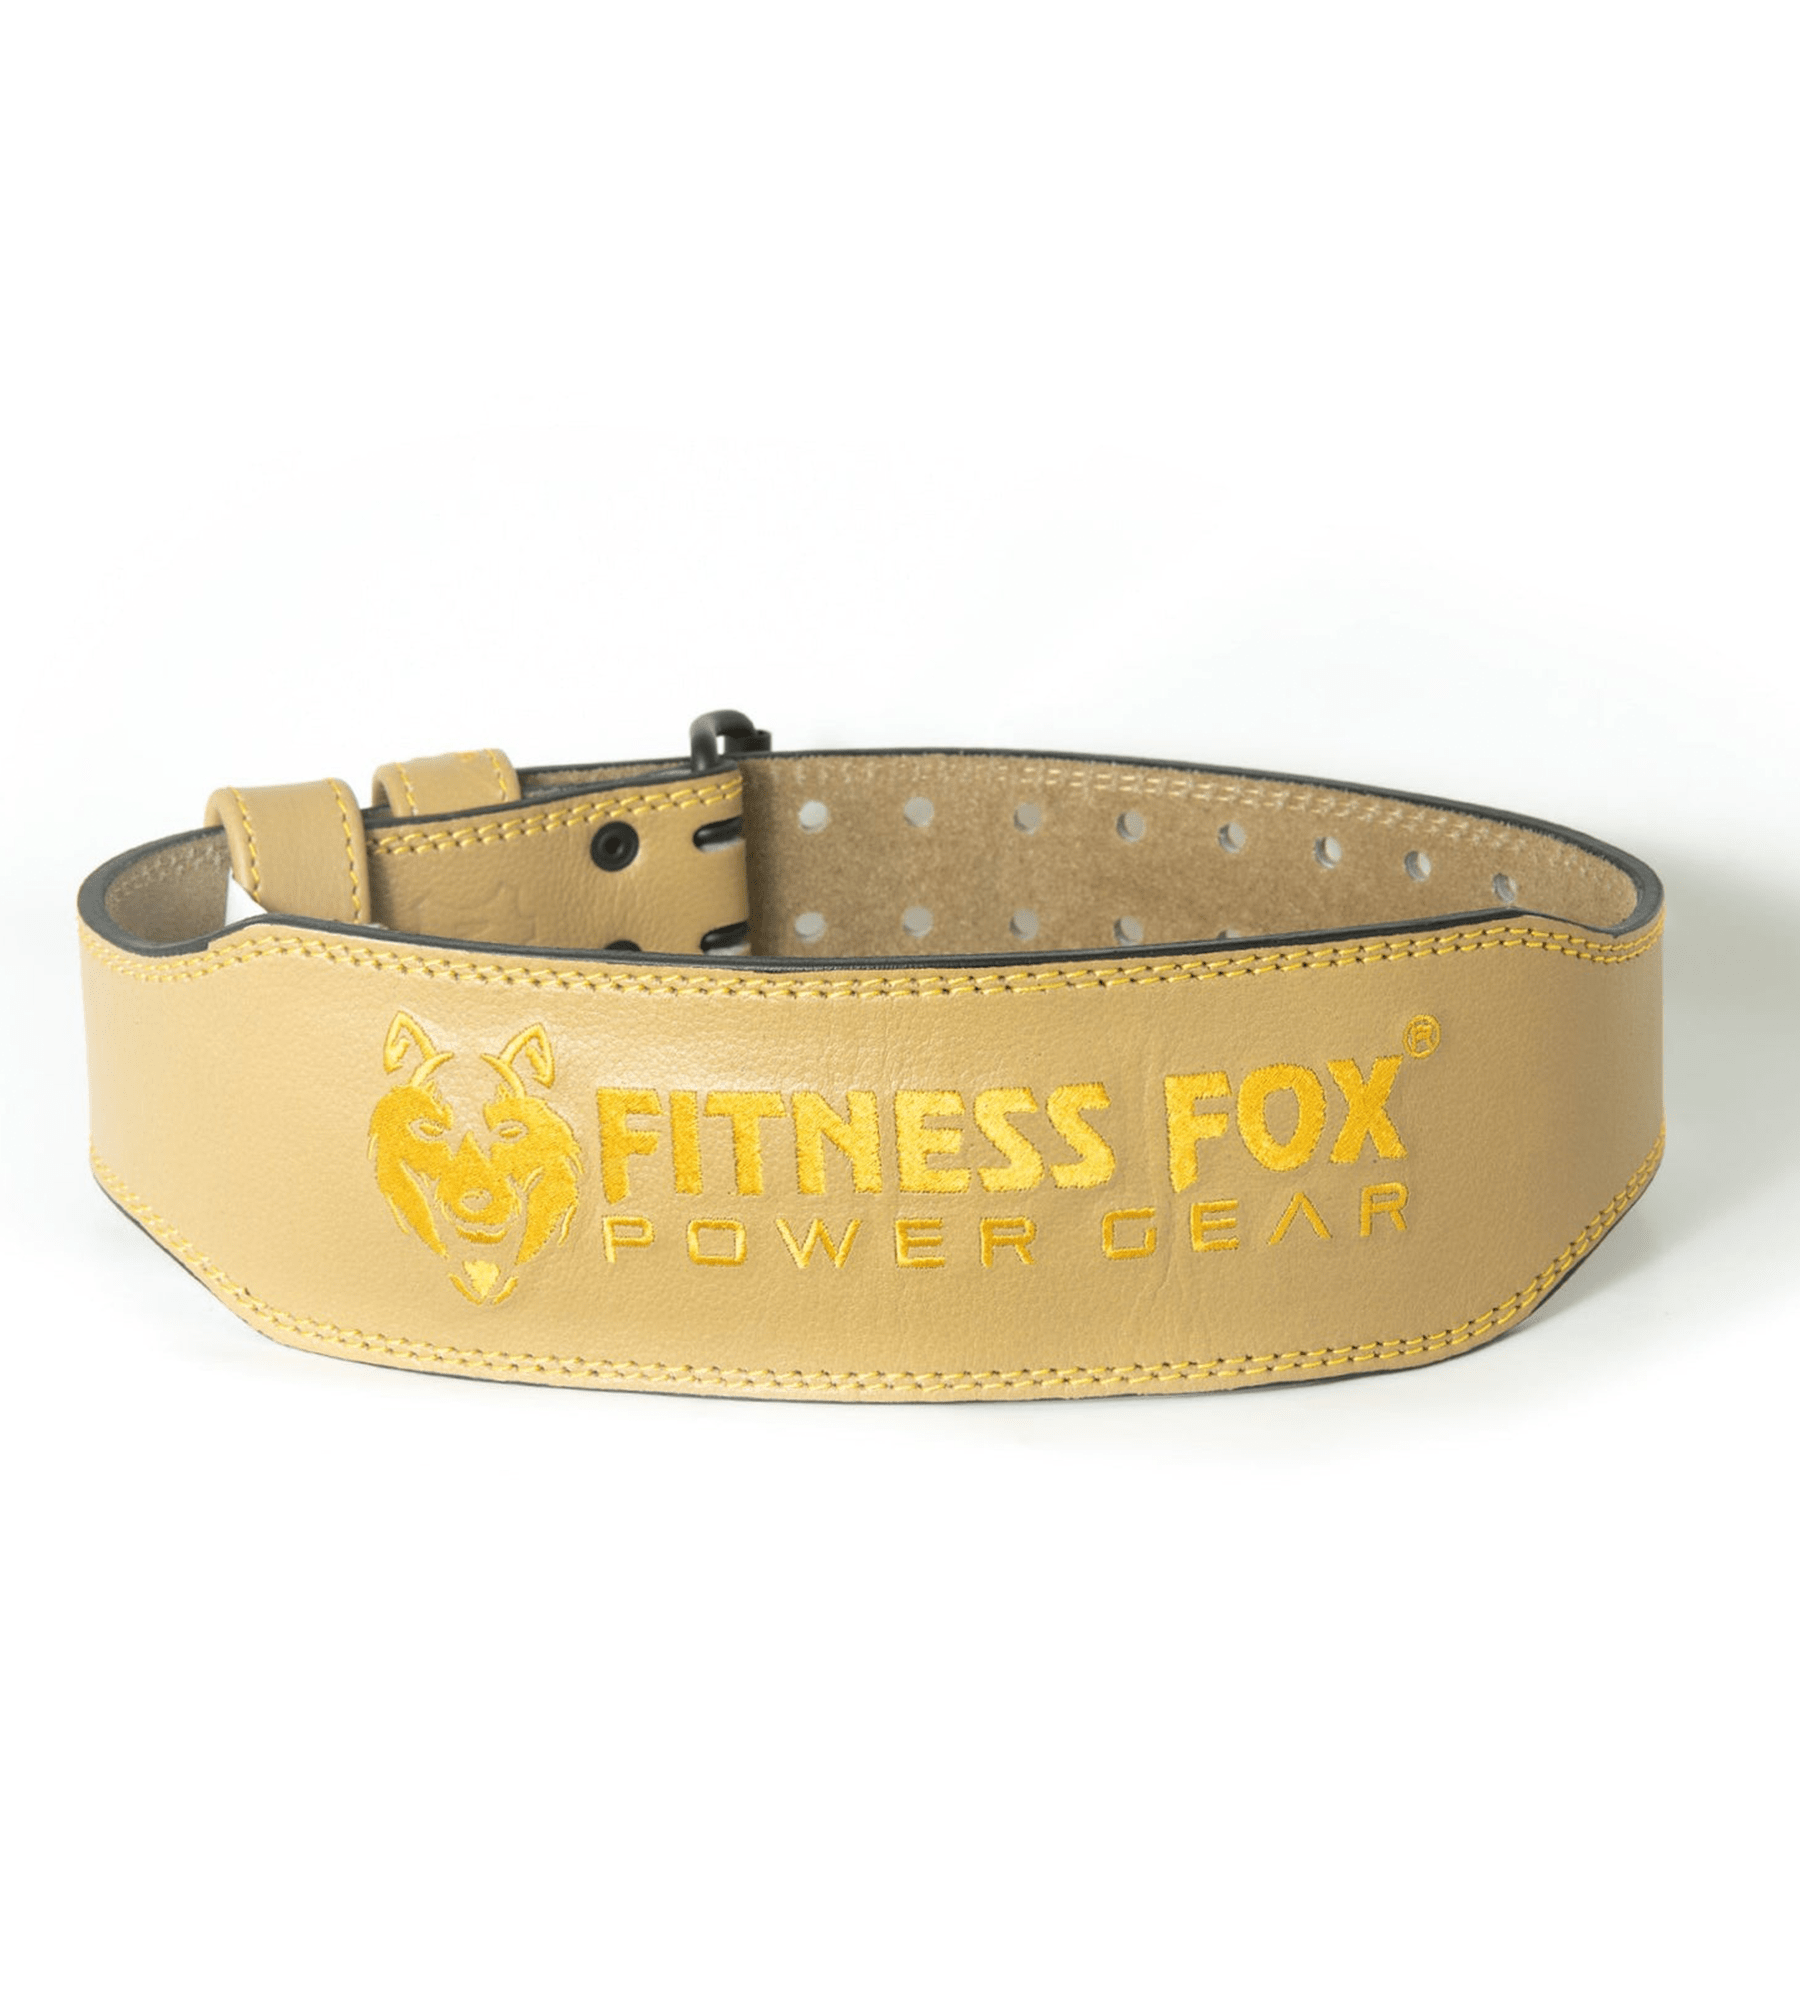 FITNESS FOX 4" TANBROWN Weightlifting LEATHER Lifting Belt (GOLD EDITION)